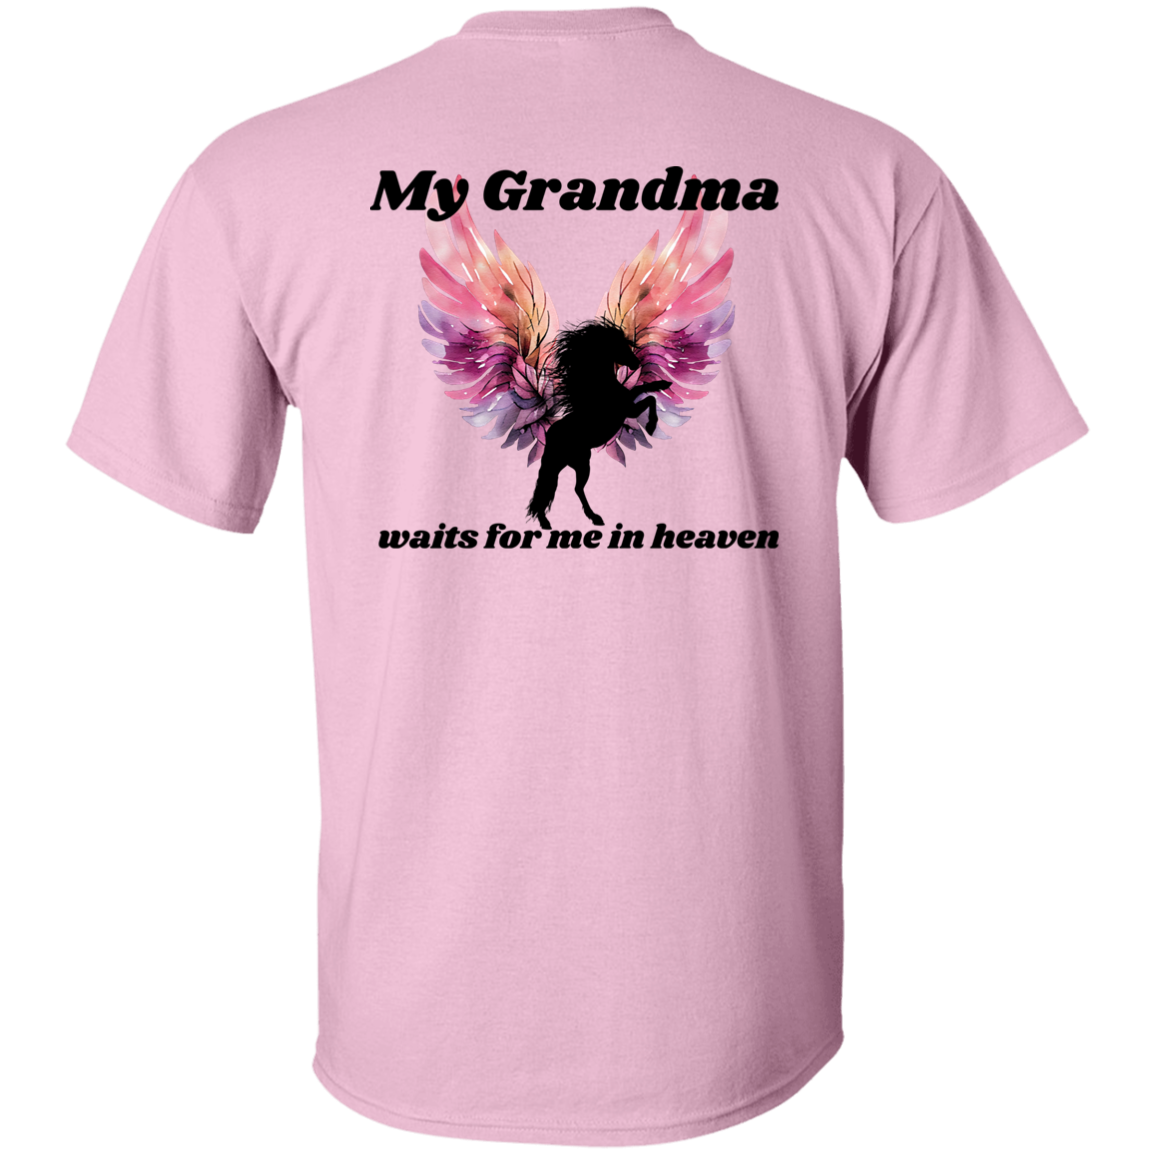 Grandma - waiting for me in heaven t-shirt - MyAllOutHorses